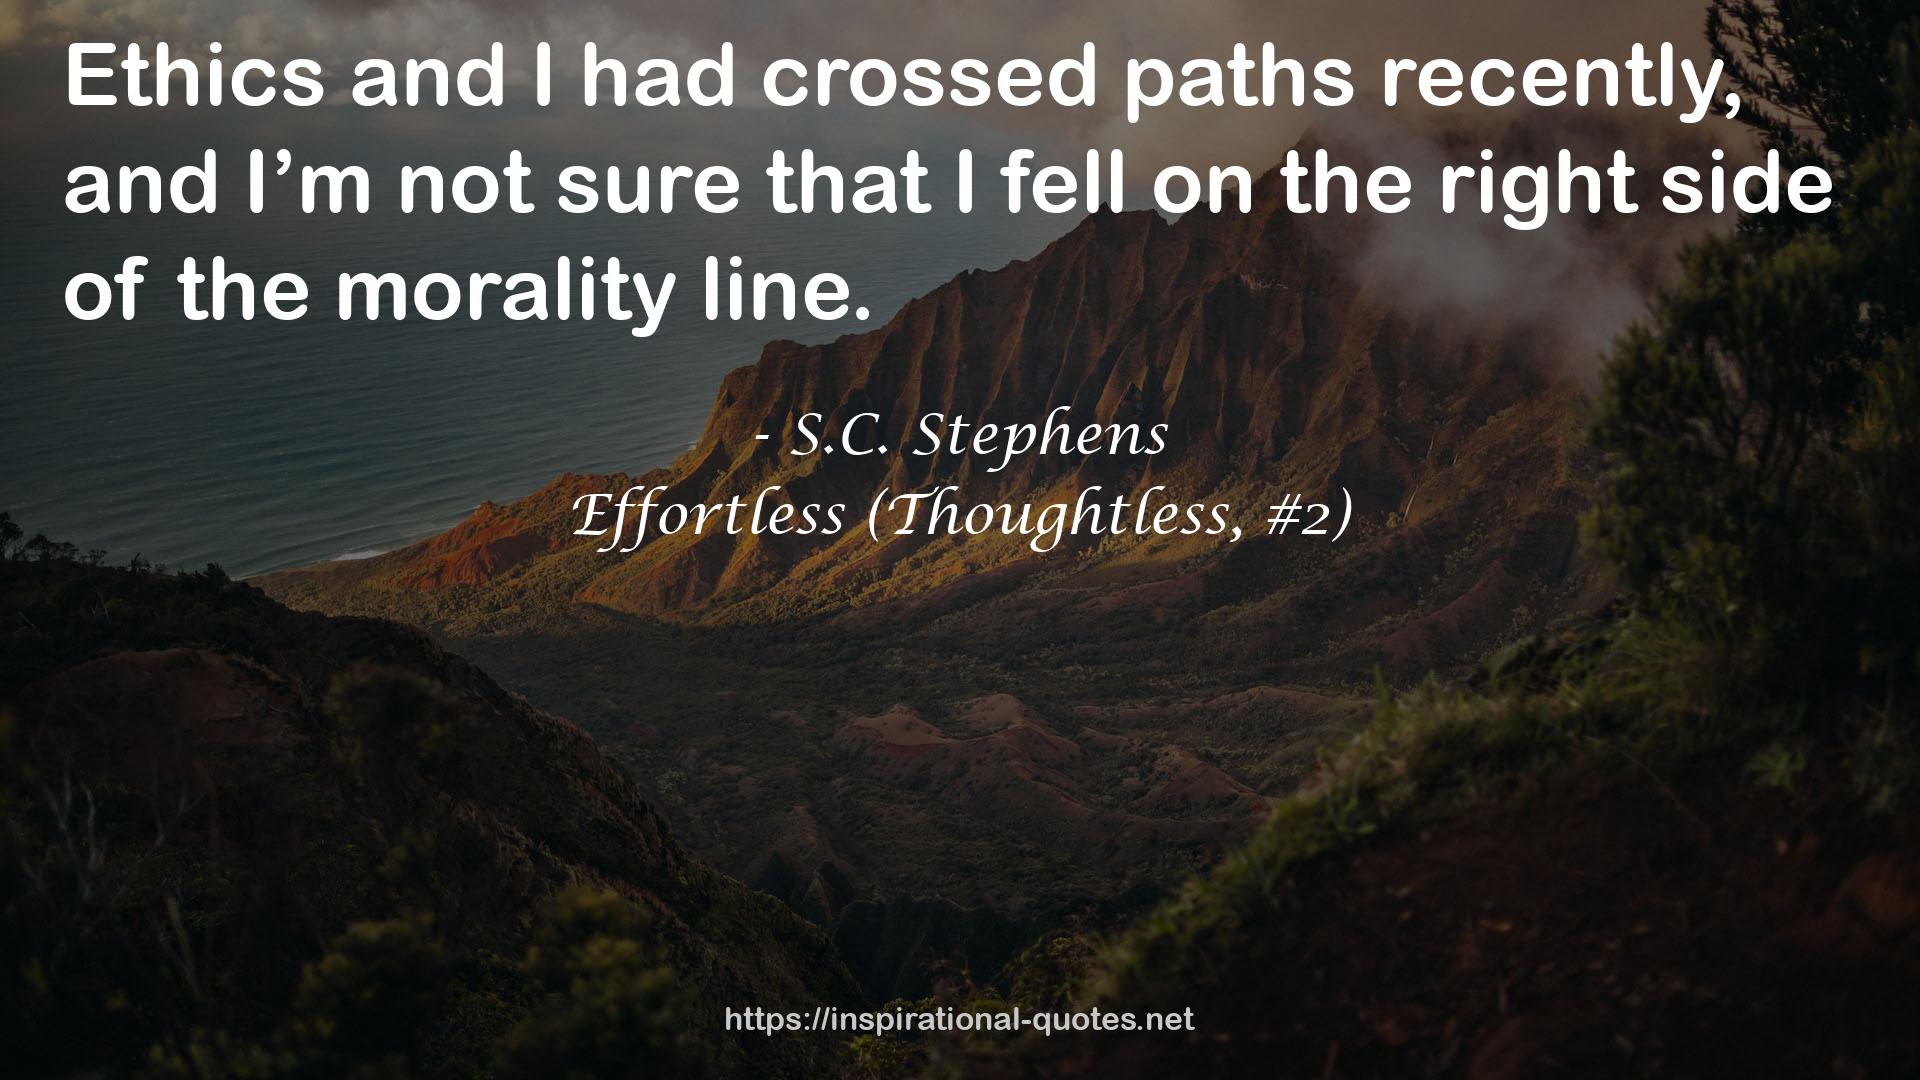 Effortless (Thoughtless, #2) QUOTES